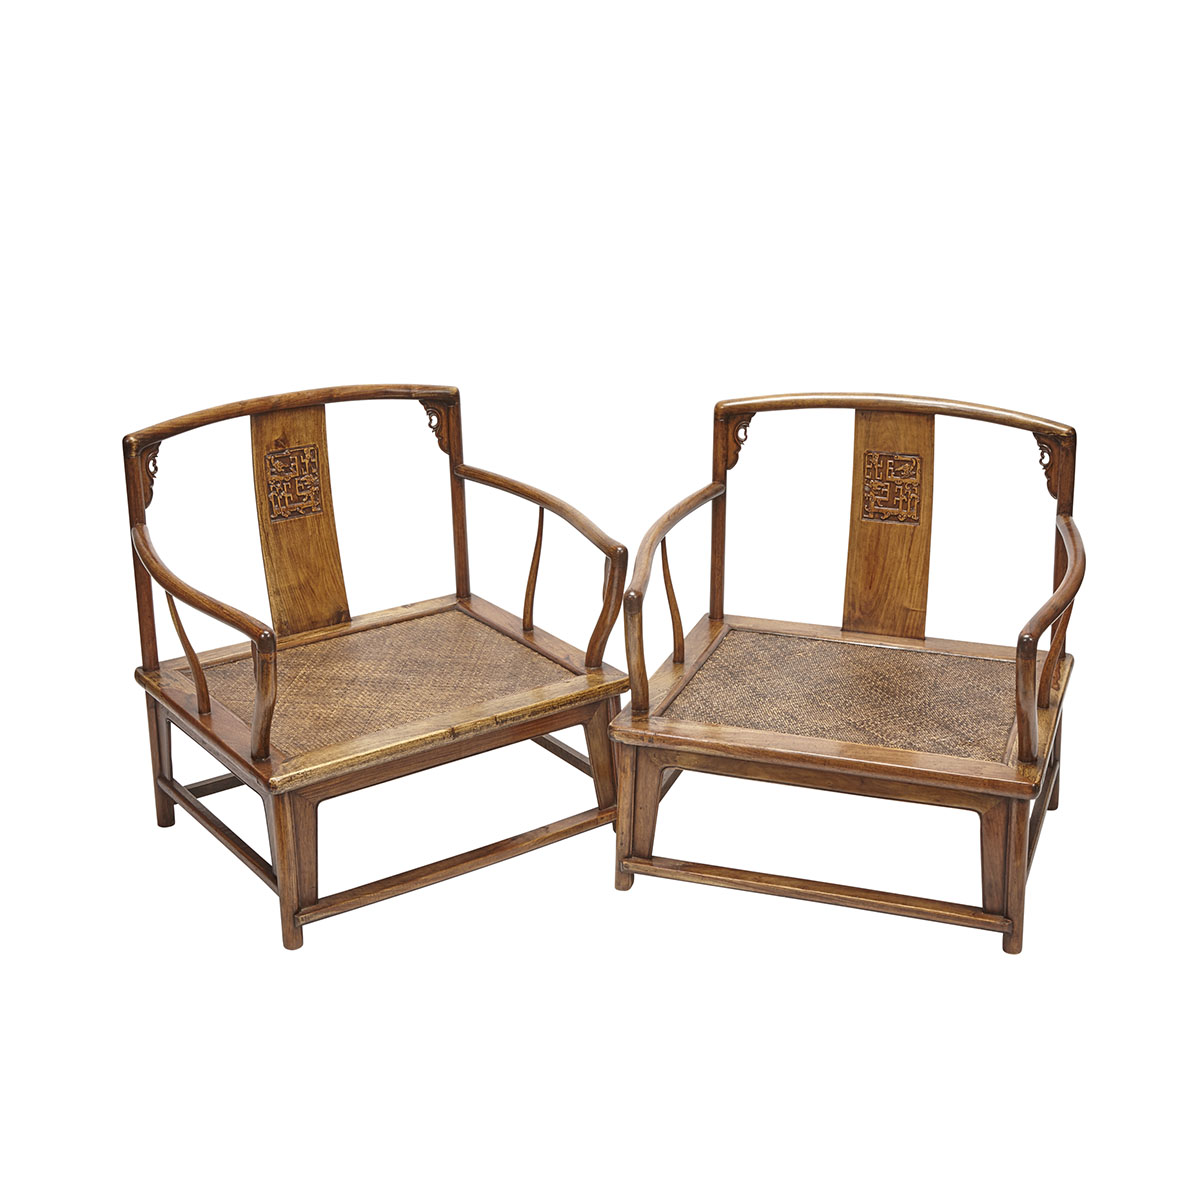 A Pair of Huanghuali Low Chairs, Qing Dynasty